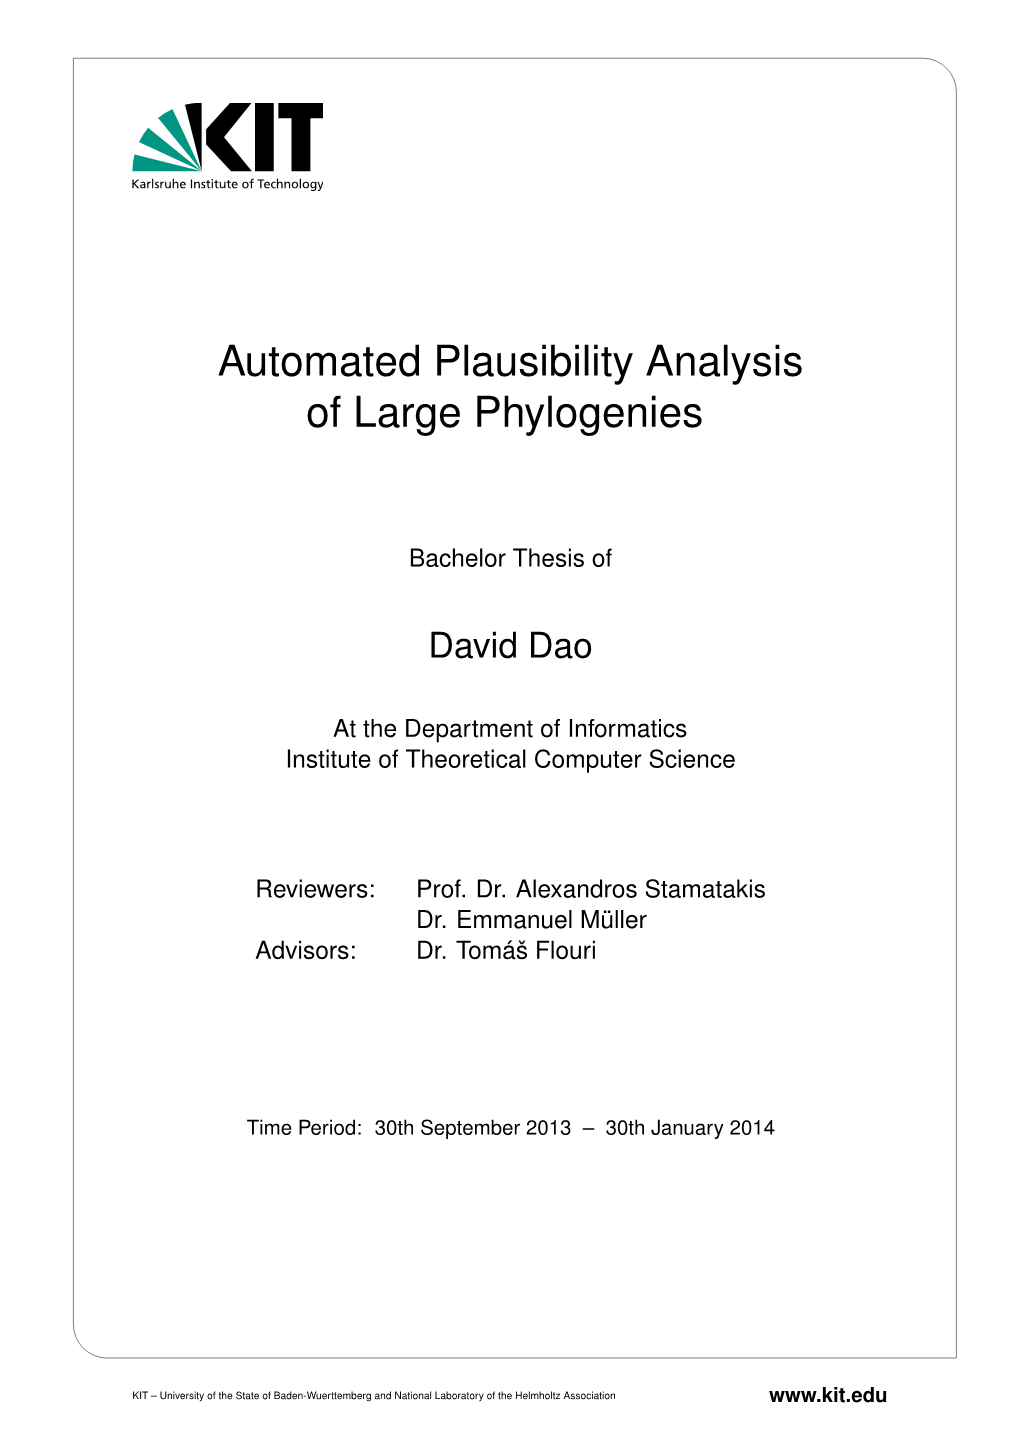 Automated Plausibility Analysis of Large Phylogenies